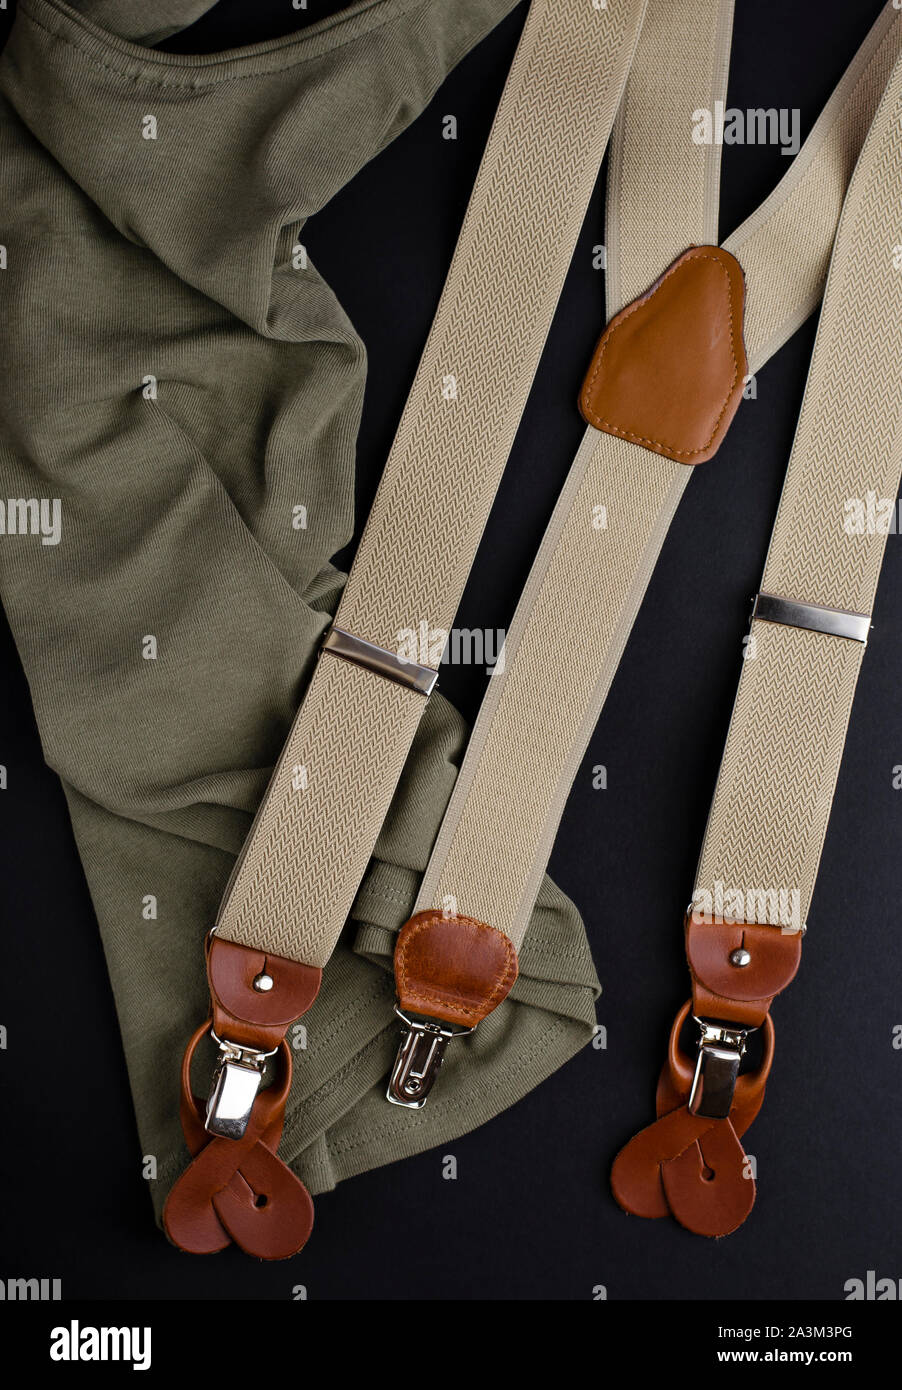 Top view of male accessories, suspenders or braces. Vertical image. Stock Photo